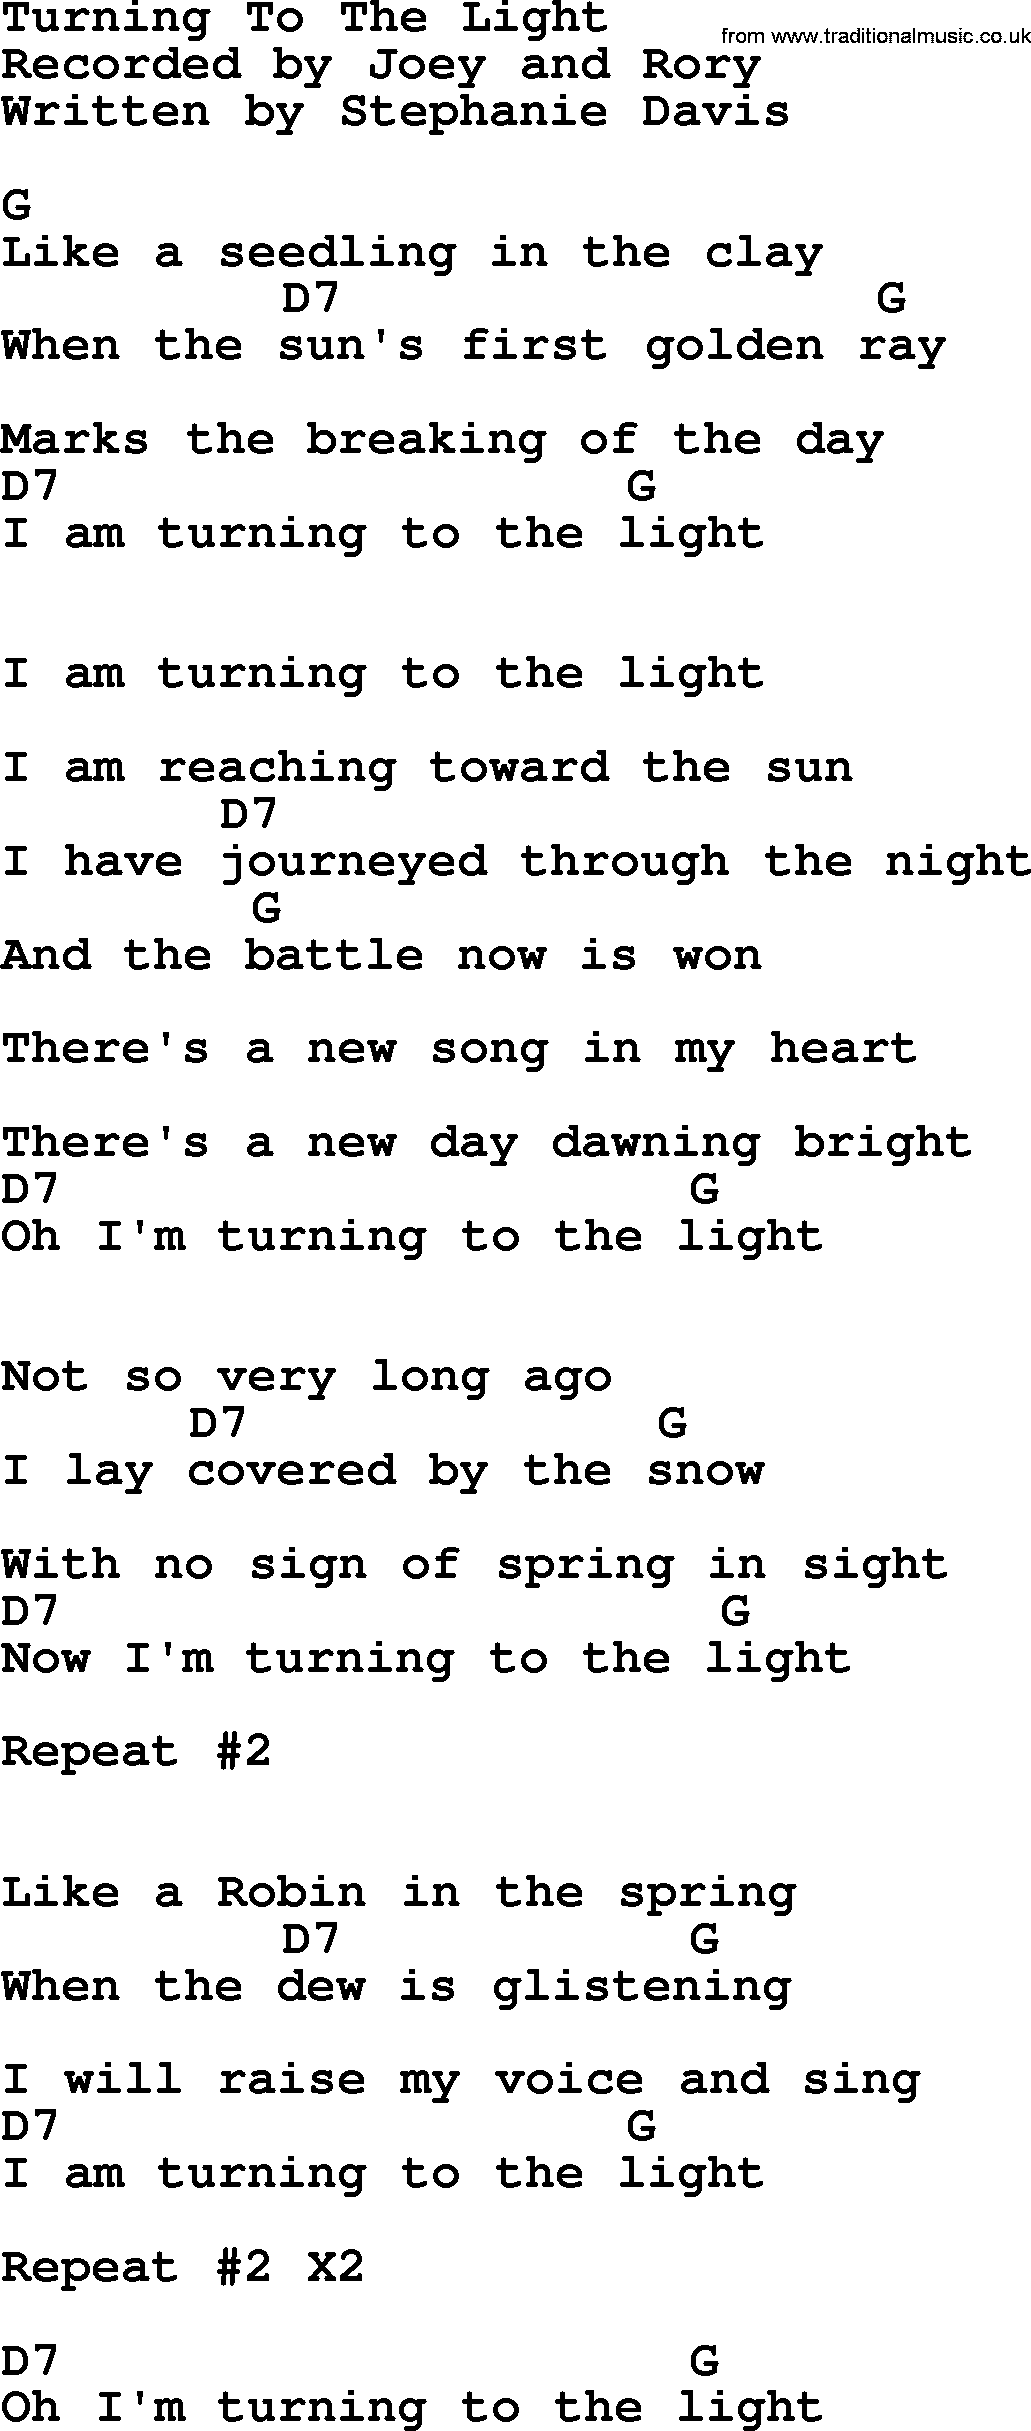 Bluegrass song: Turning To The Light, lyrics and chords